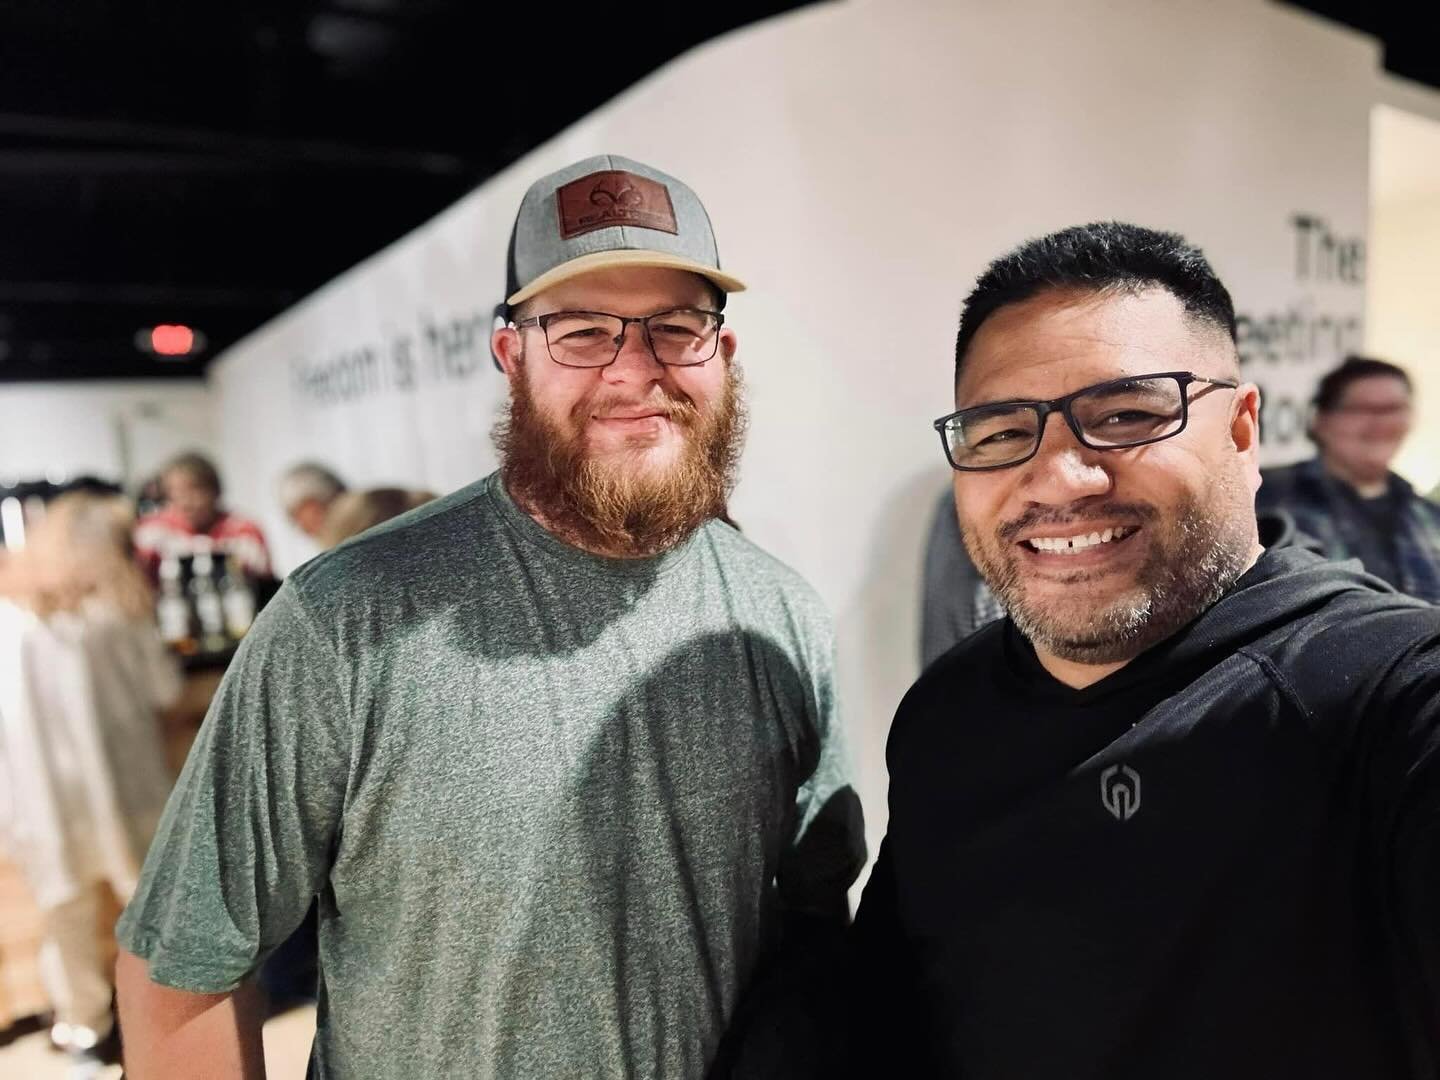 Stephen (MD) was the first one to sign up and begin using Tribe Builder when it first launched. He has shared with me a number of stories about the men gathering, connecting, and growing through the last 90 days. 
.
Recently he told me &ldquo;I was b